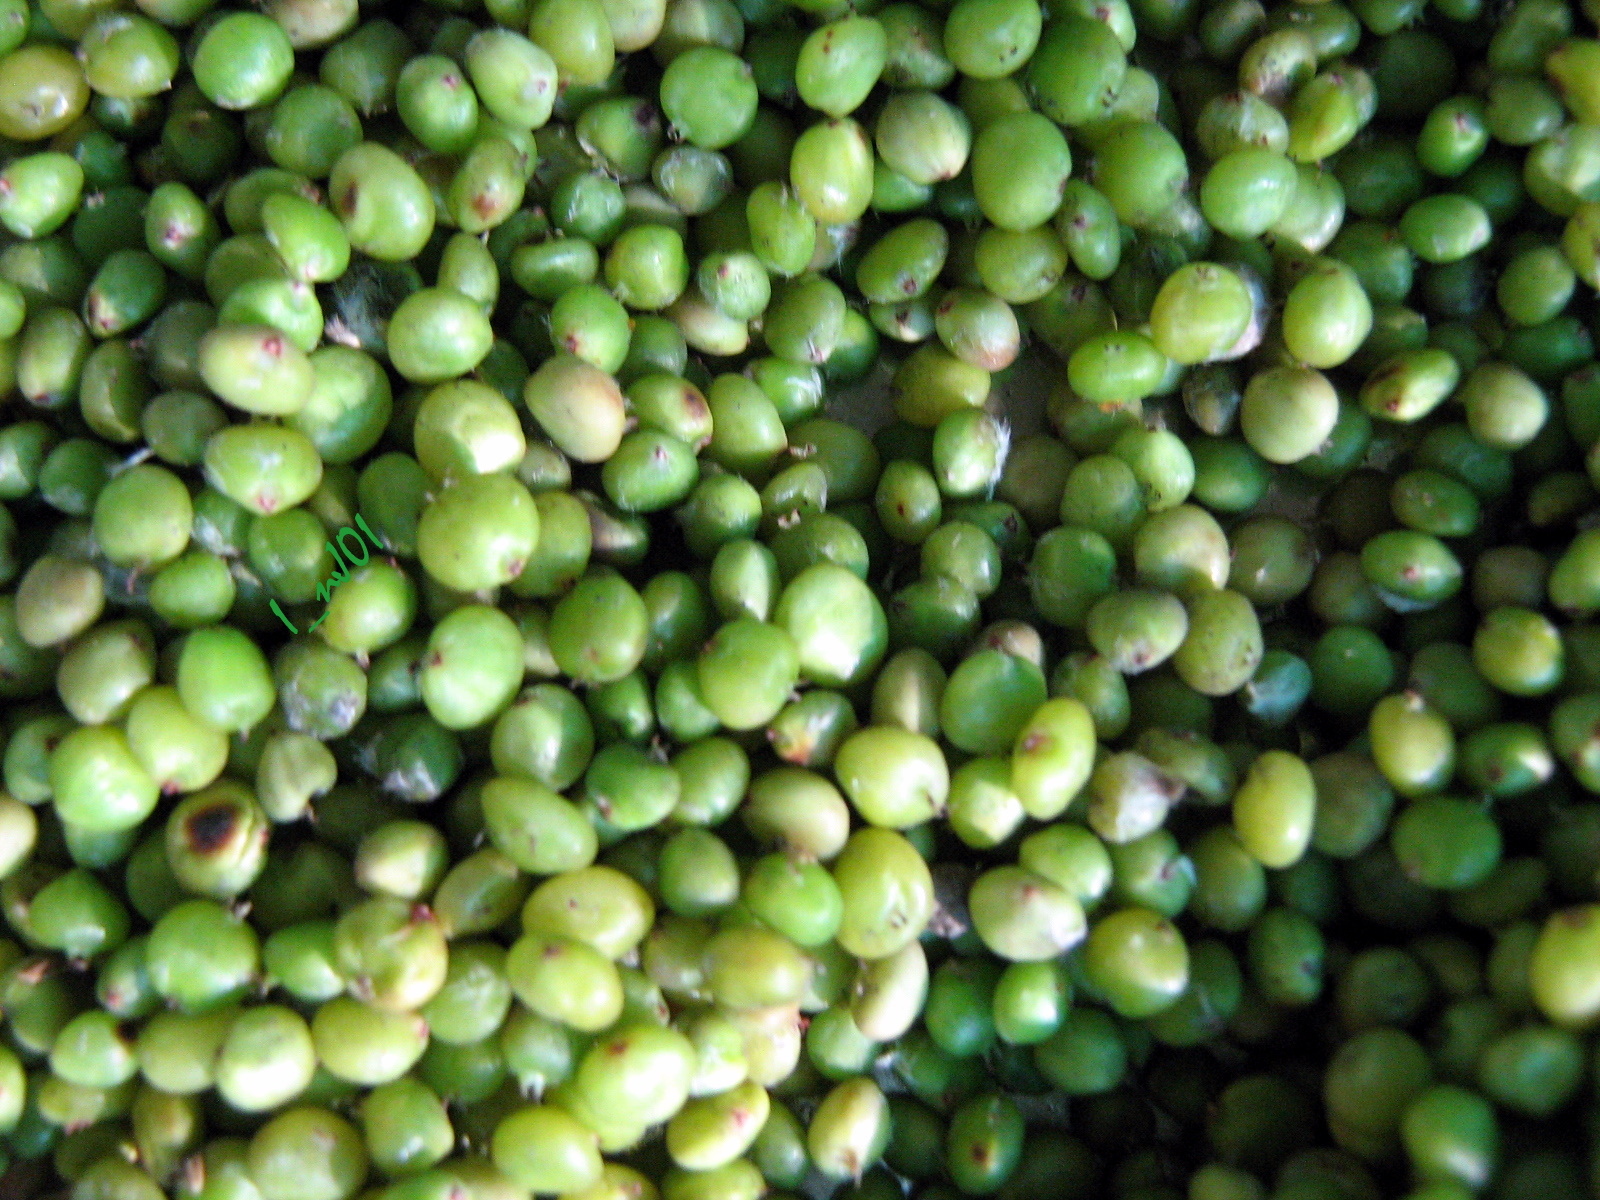 several pieces of green food with brown spots